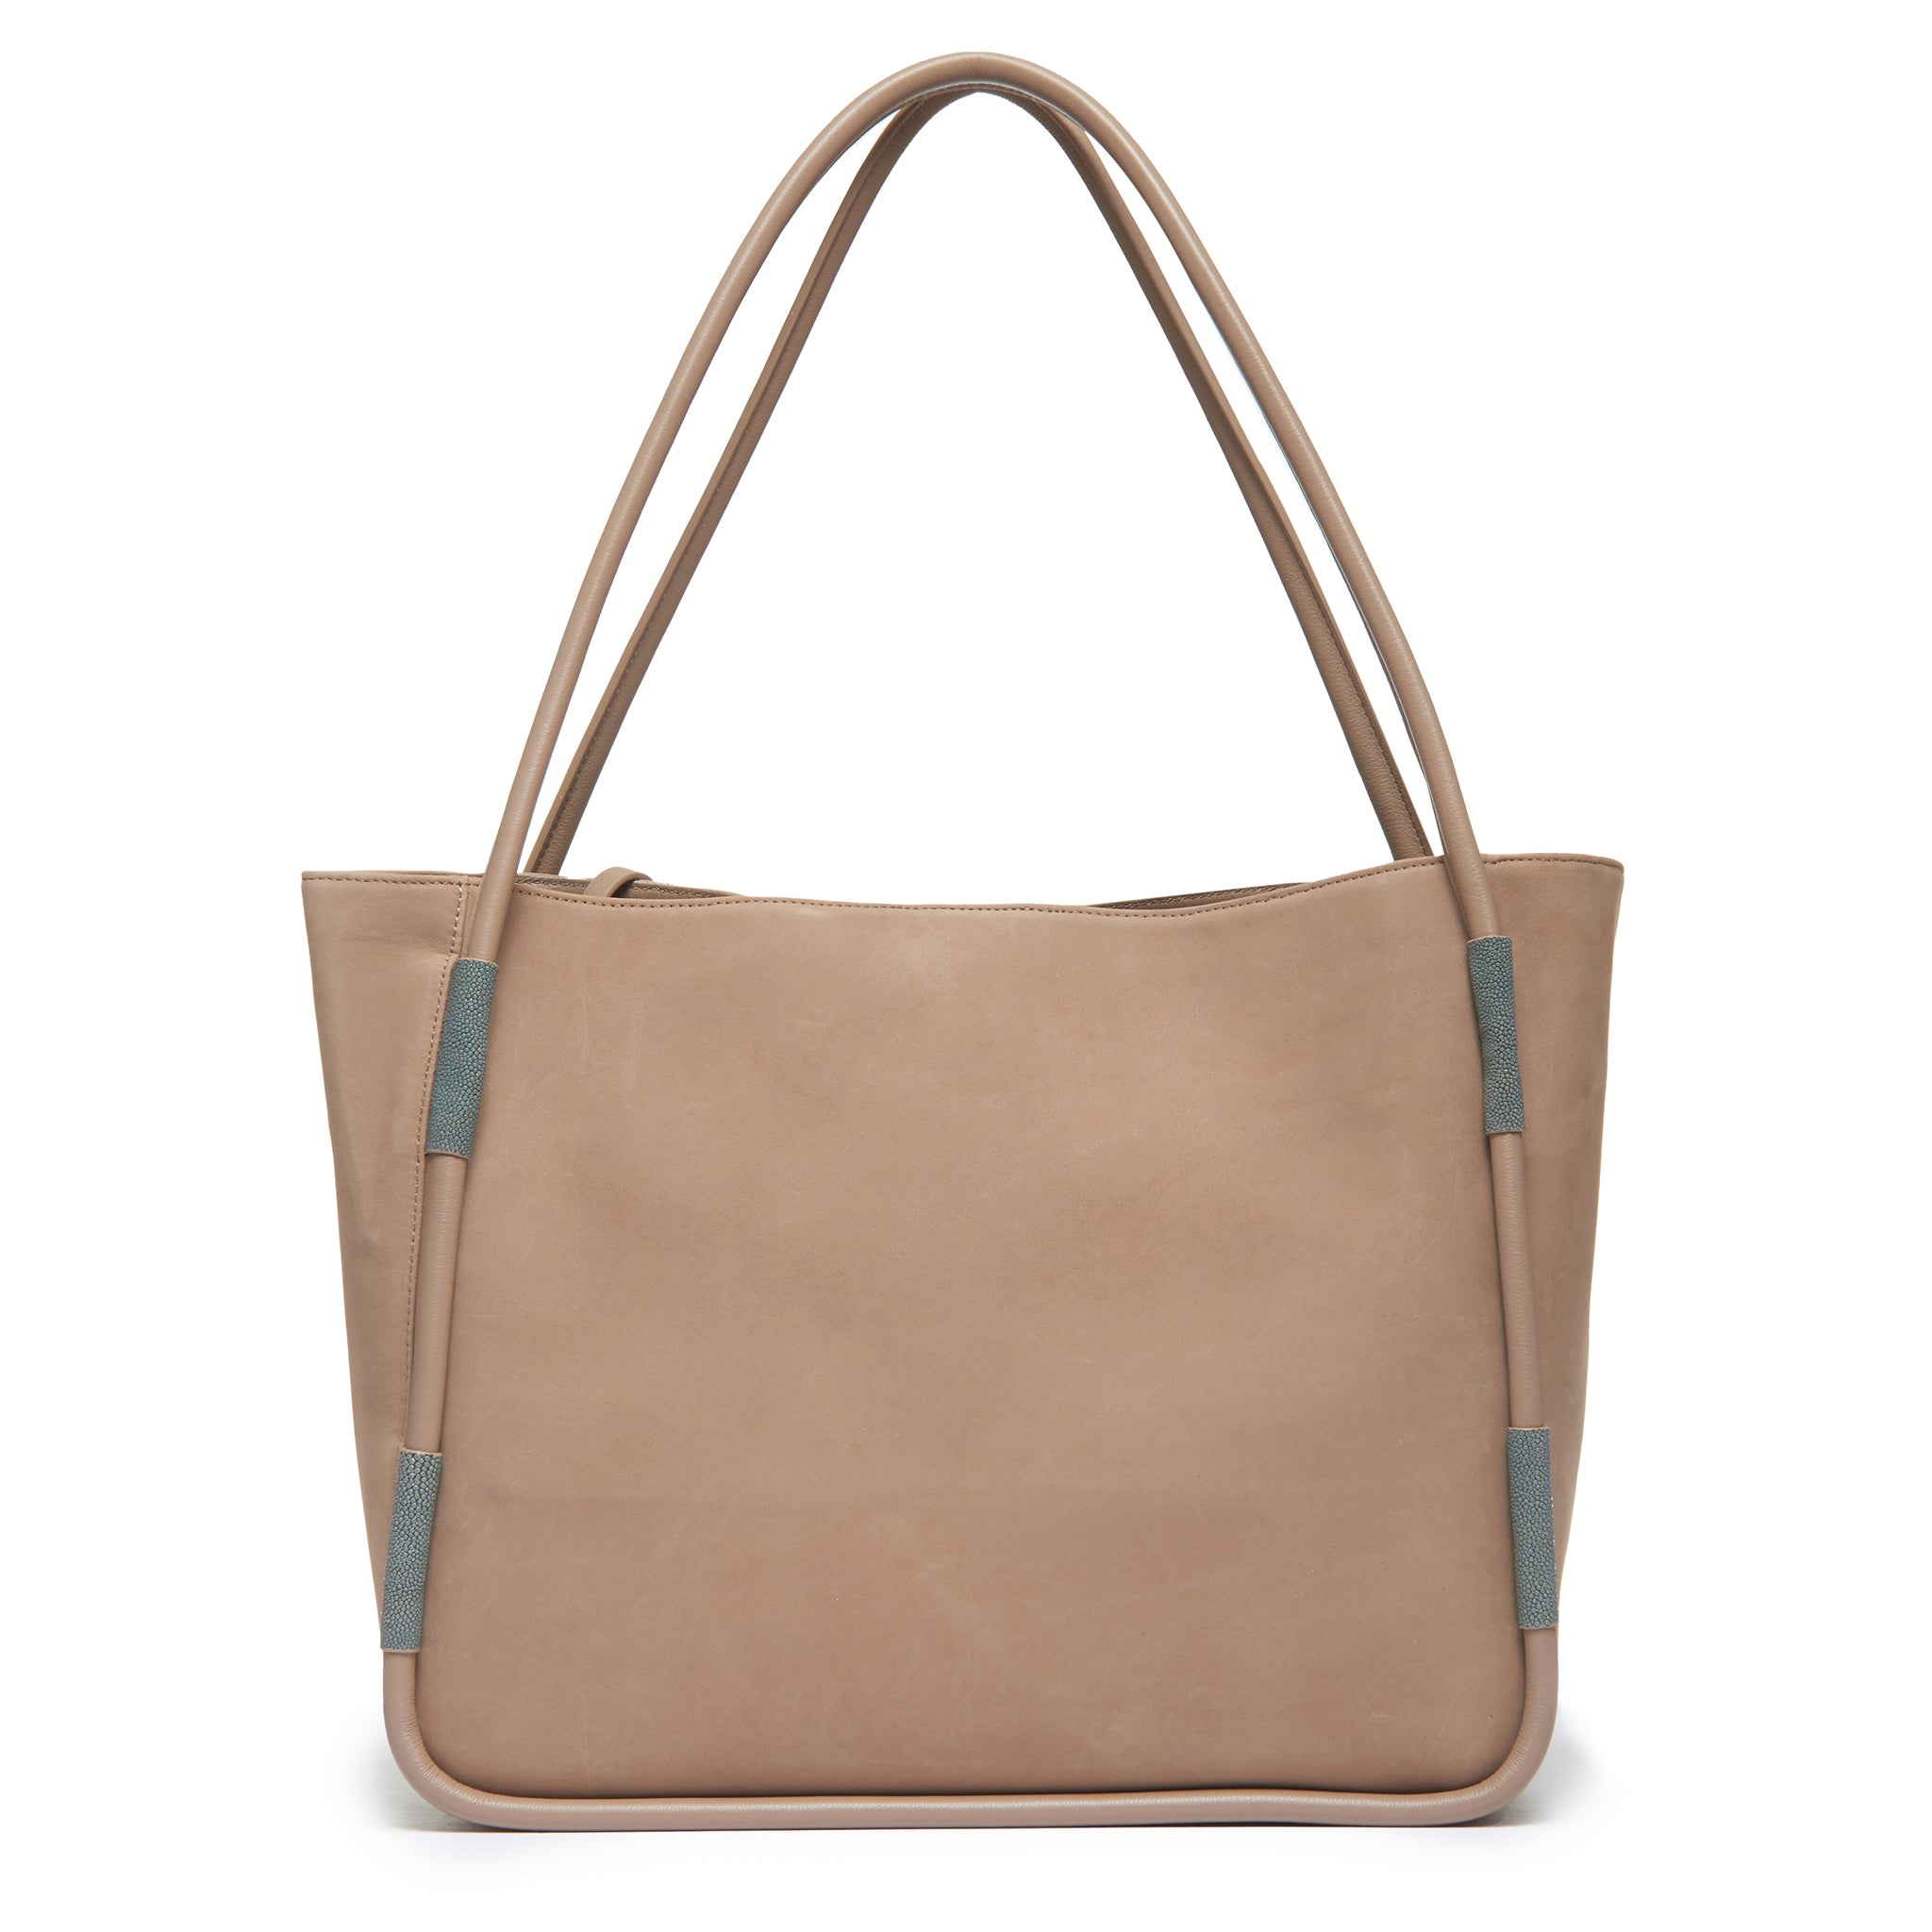 QUINN, Nubuck Tote With Shagreen Details